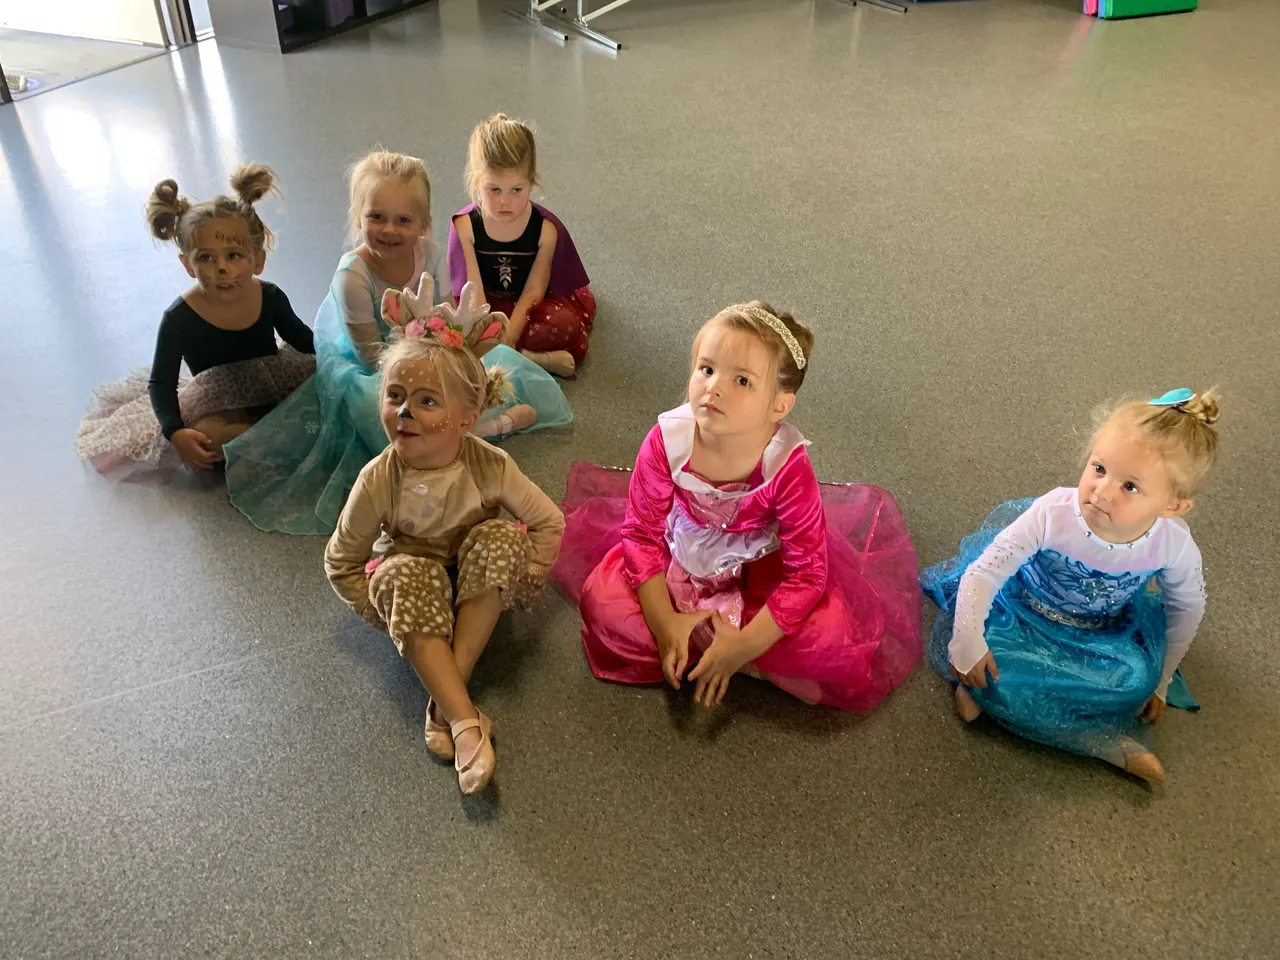 A group of little girls sitting on the floor